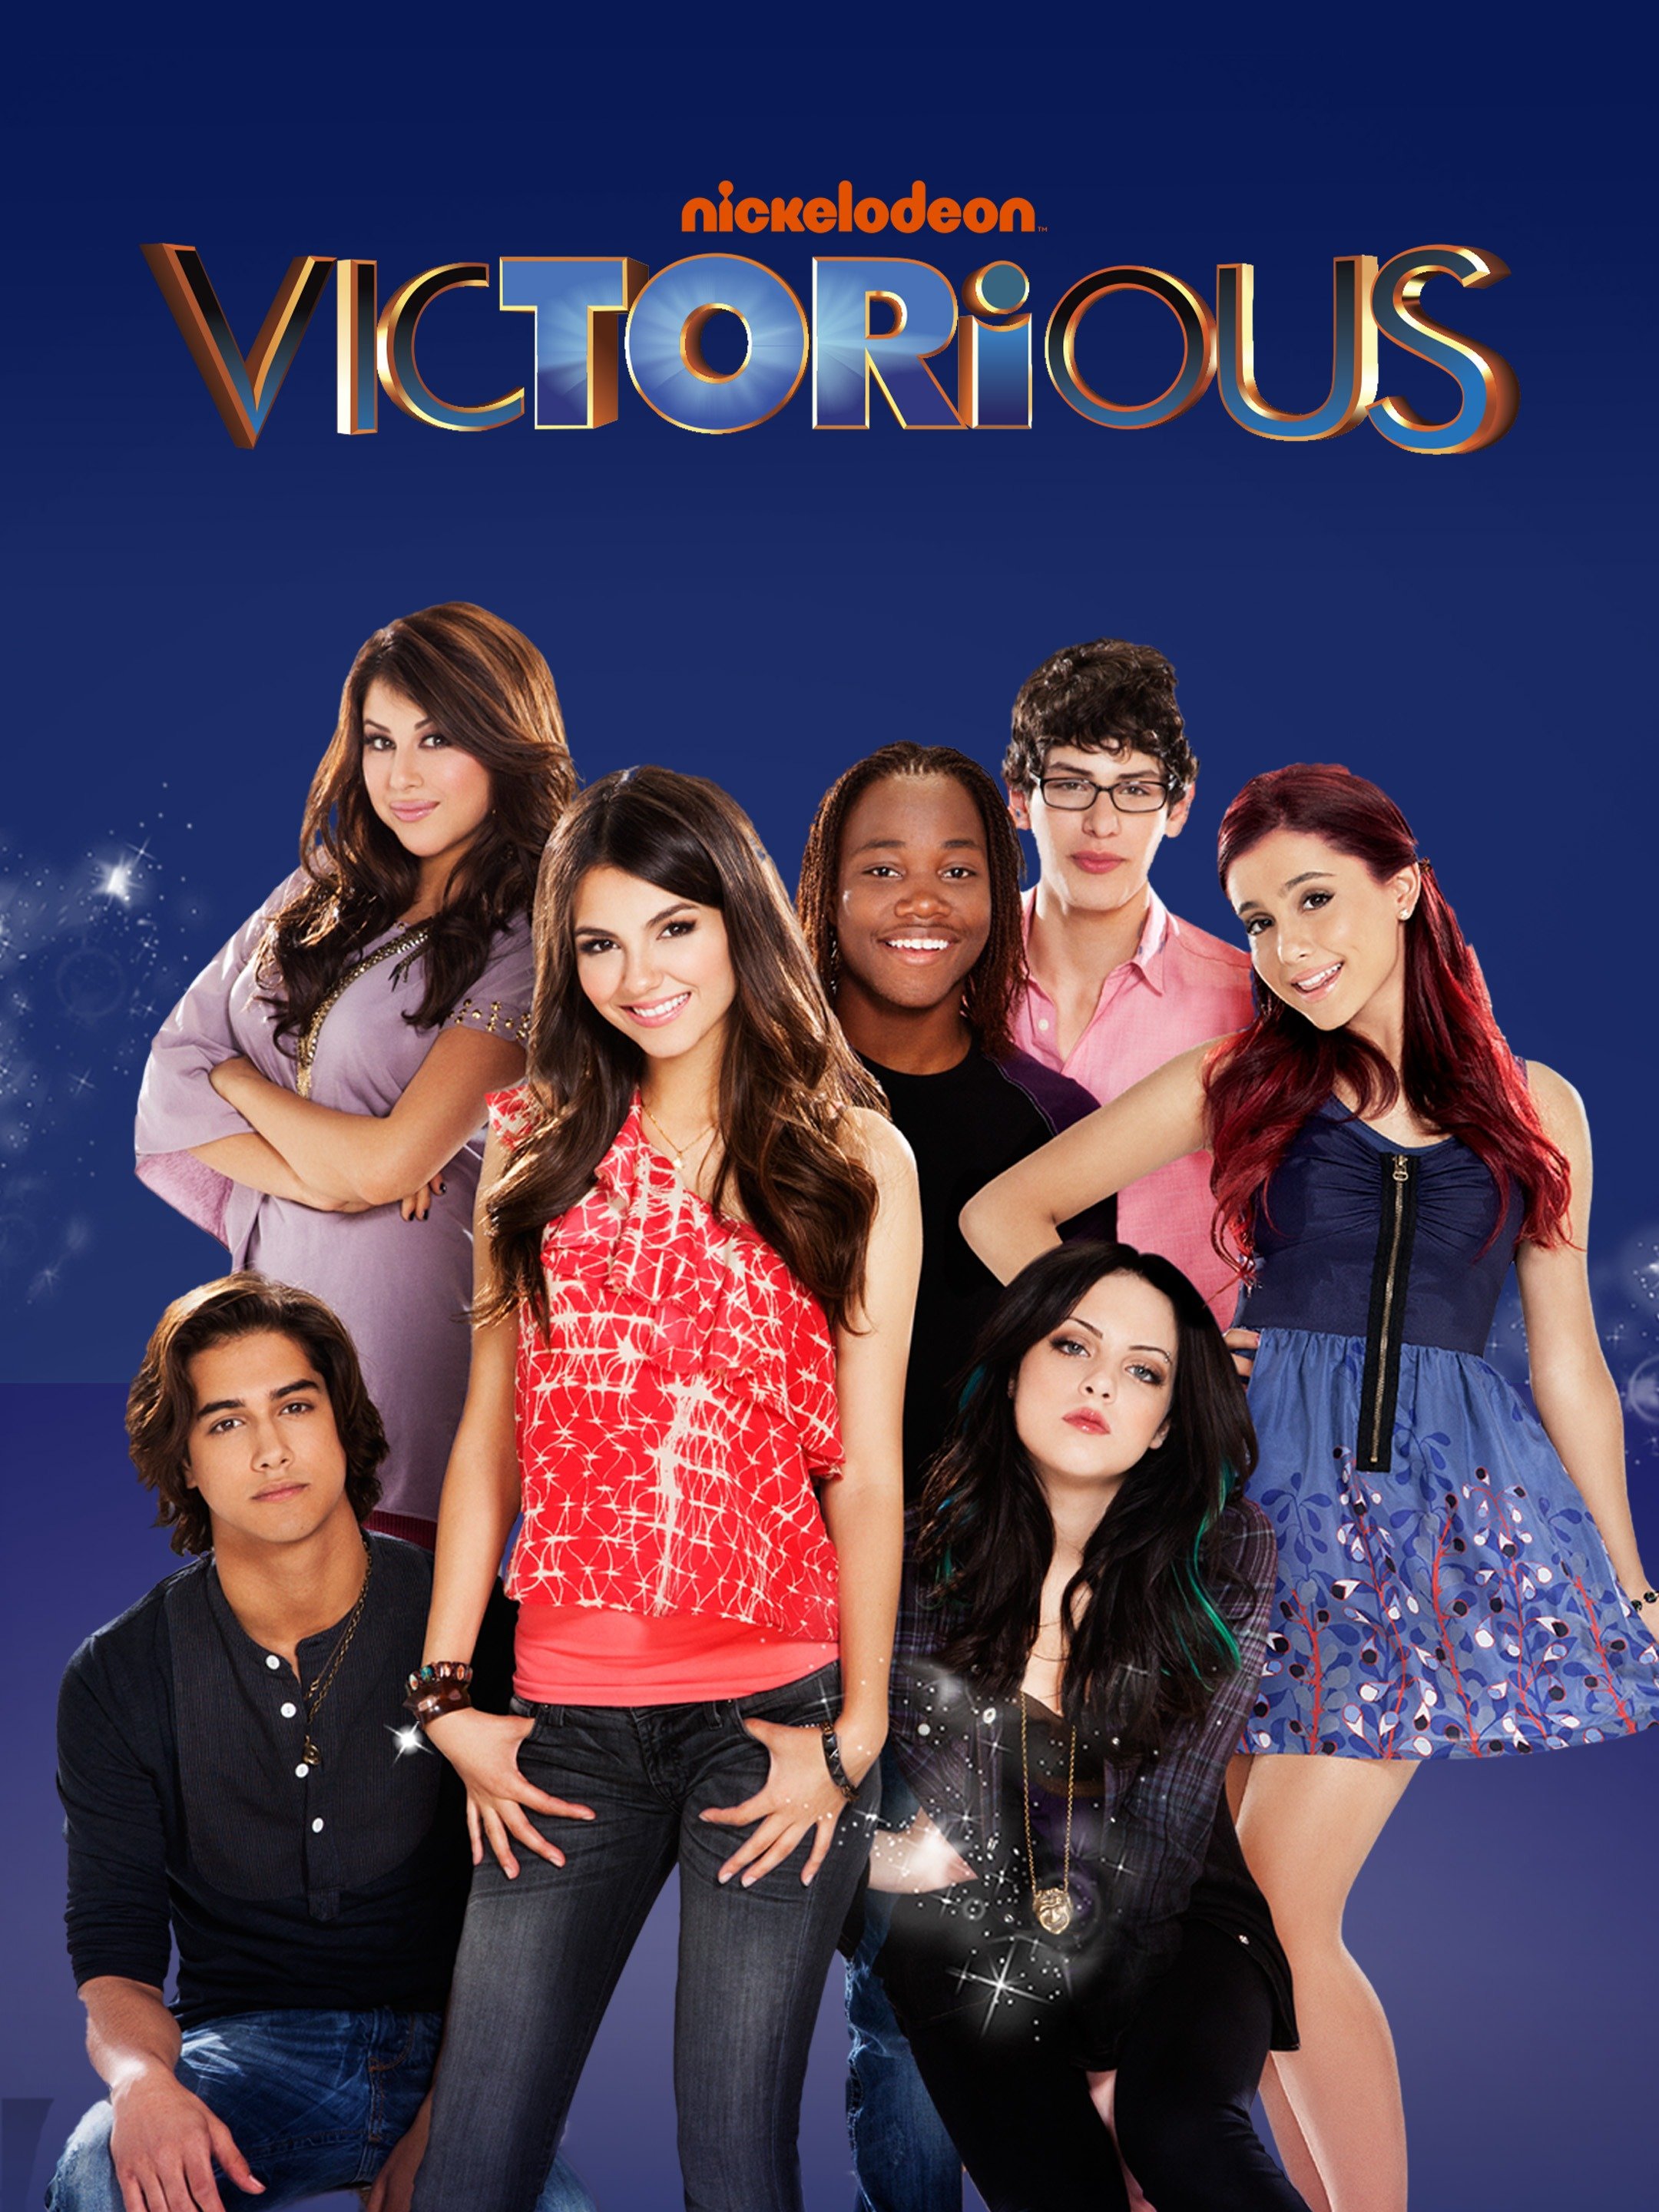 https://static.wikia.nocookie.net/arianagrande/images/c/c0/Victorious_Poster.jpg/revision/latest?cb=20221224164826